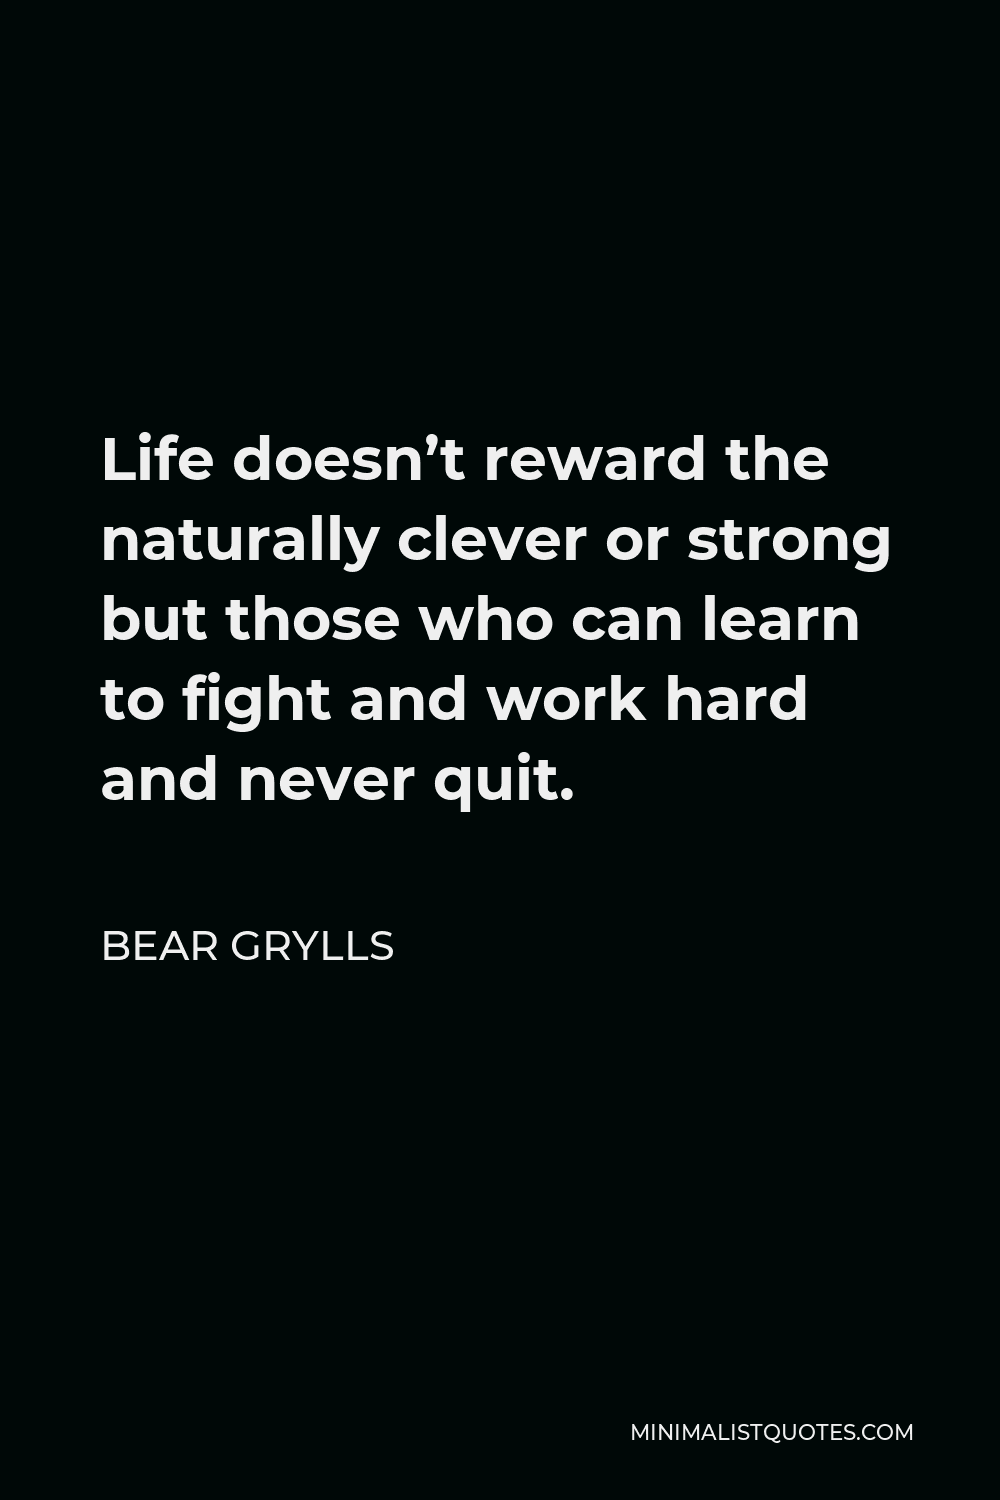 Bear Grylls Quote - Life doesn’t reward the naturally clever or strong but those who can learn to fight and work hard and never quit.